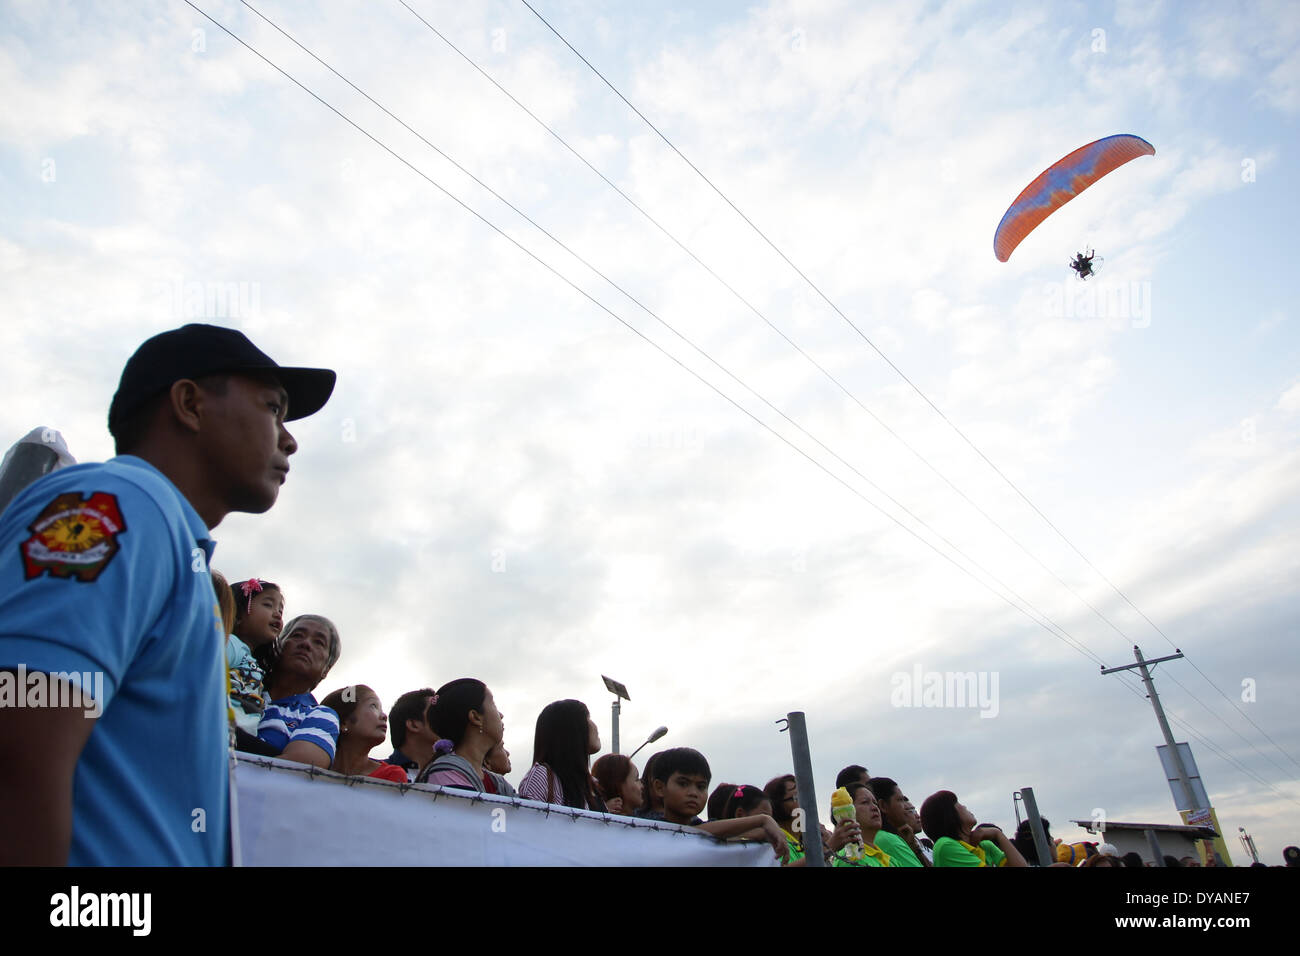 Lubao, Pampanga, Philippines. 11th Apr, 2014. People watch a paramotor pass by at the Philippine International Hot Air Balloon Festival on April 11, 2014. The Philippine International Hot Air Ballon Festival featured 21 countries with 37 balloons. Credit:  Mark Cristino/NurPhoto/ZUMAPRESS.com/Alamy Live News Stock Photo